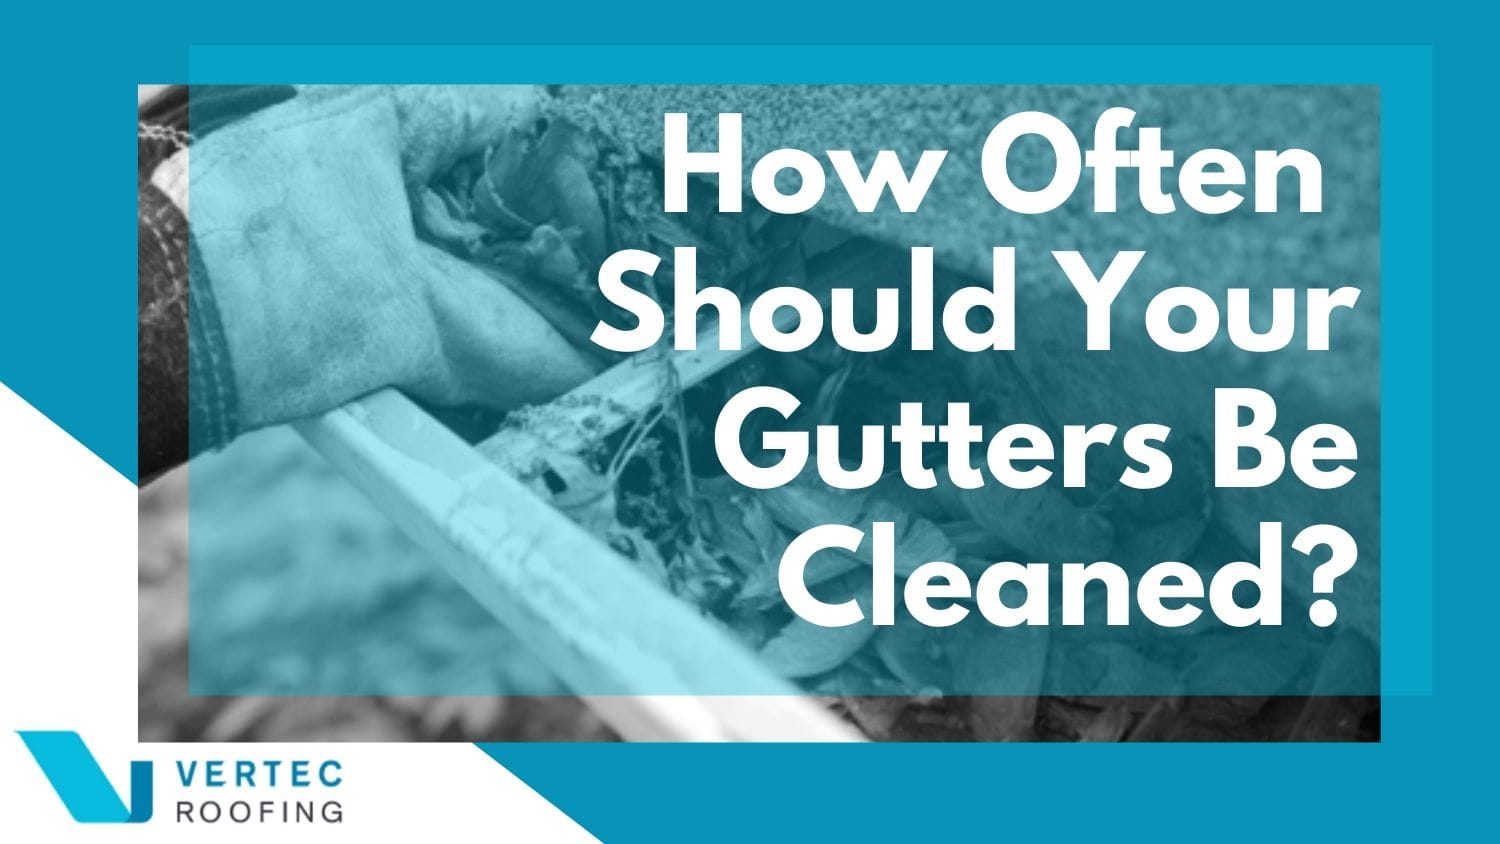 How Often Should Gutters Be Cleaned? Gutter Cleaning Explained